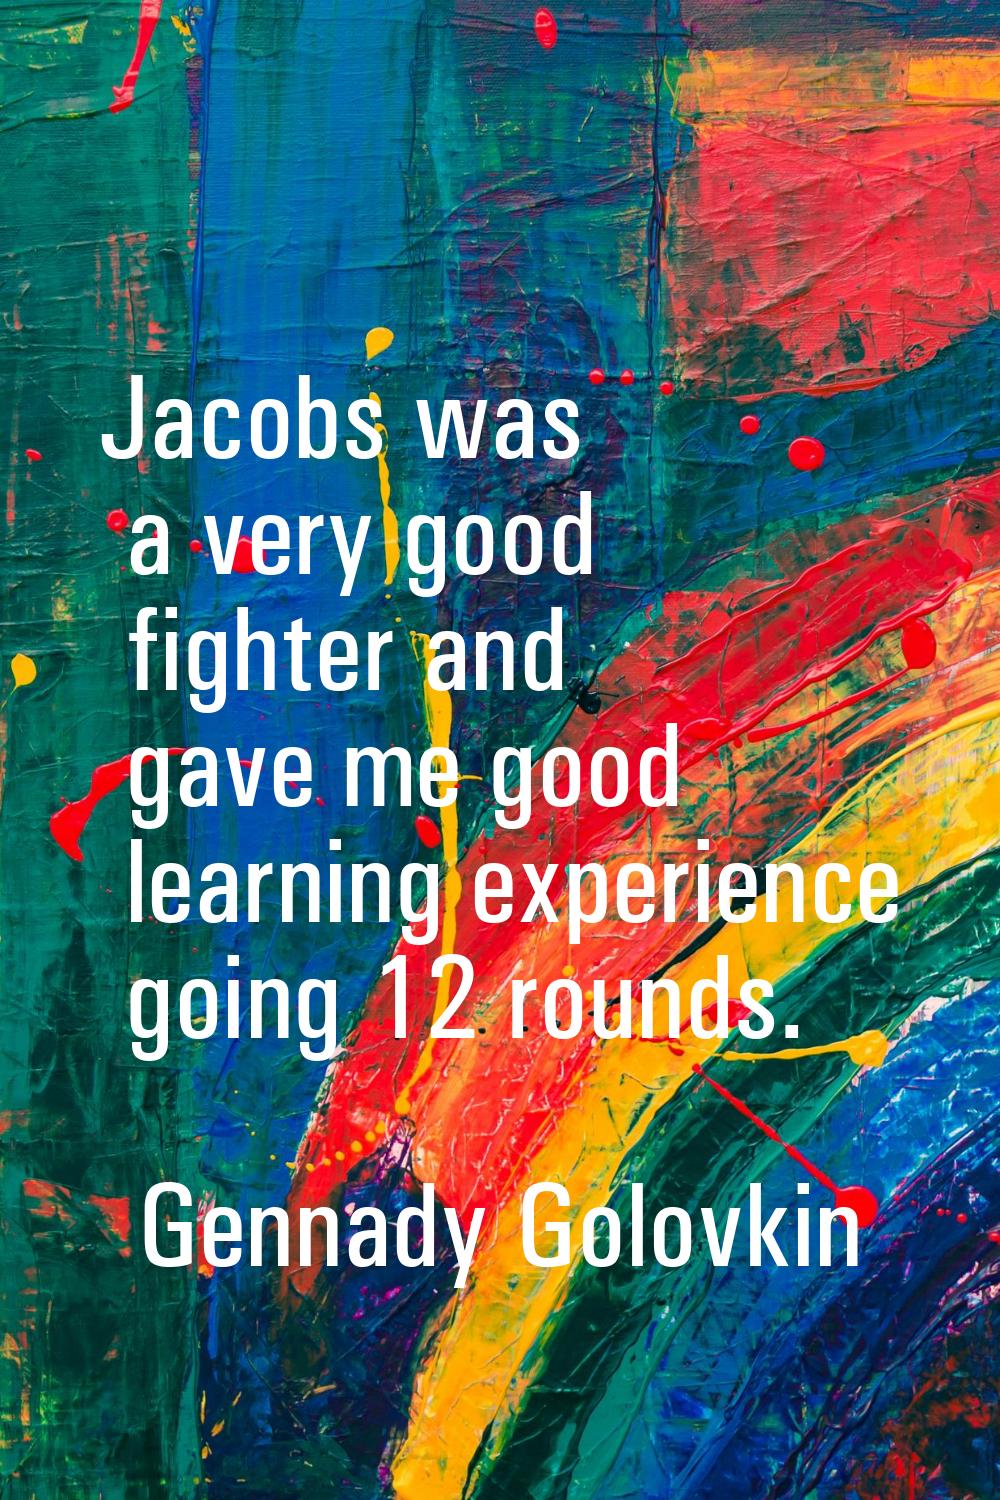 Jacobs was a very good fighter and gave me good learning experience going 12 rounds.